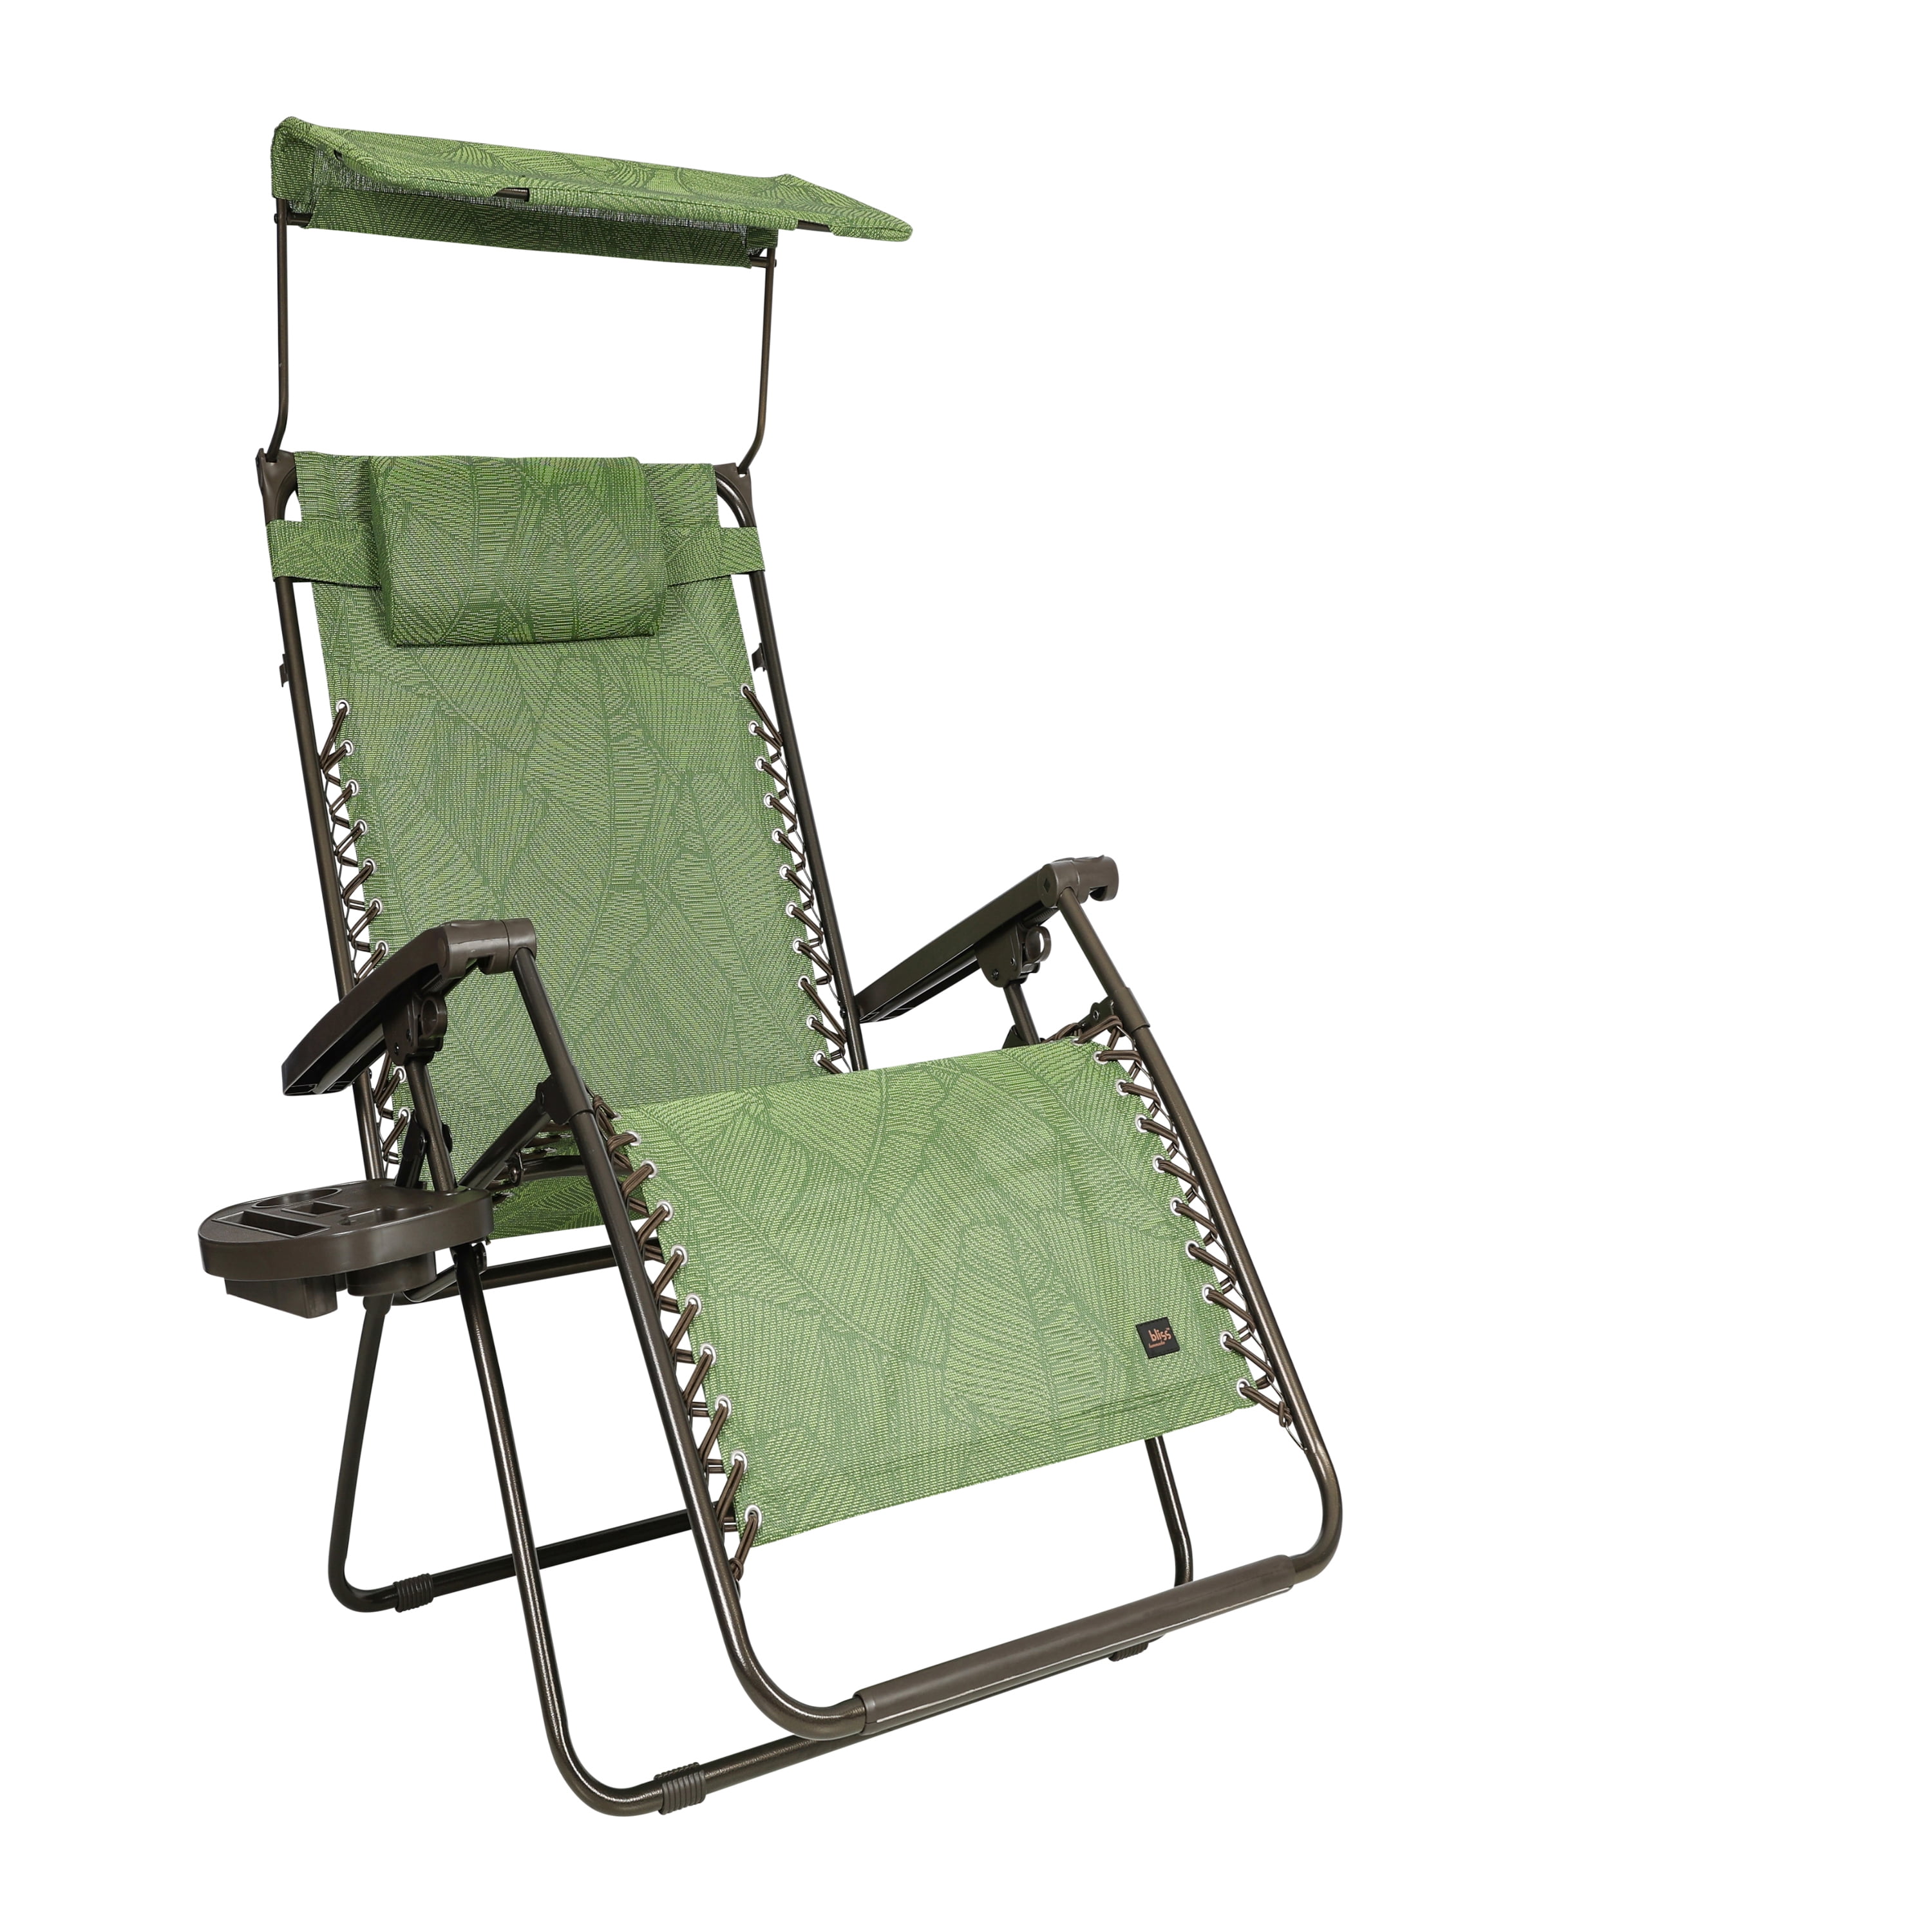 Bliss Hammocks 26 Gravity Free Beach Chair w/ Pillow & Canopy, Weather &  Rust Resistant